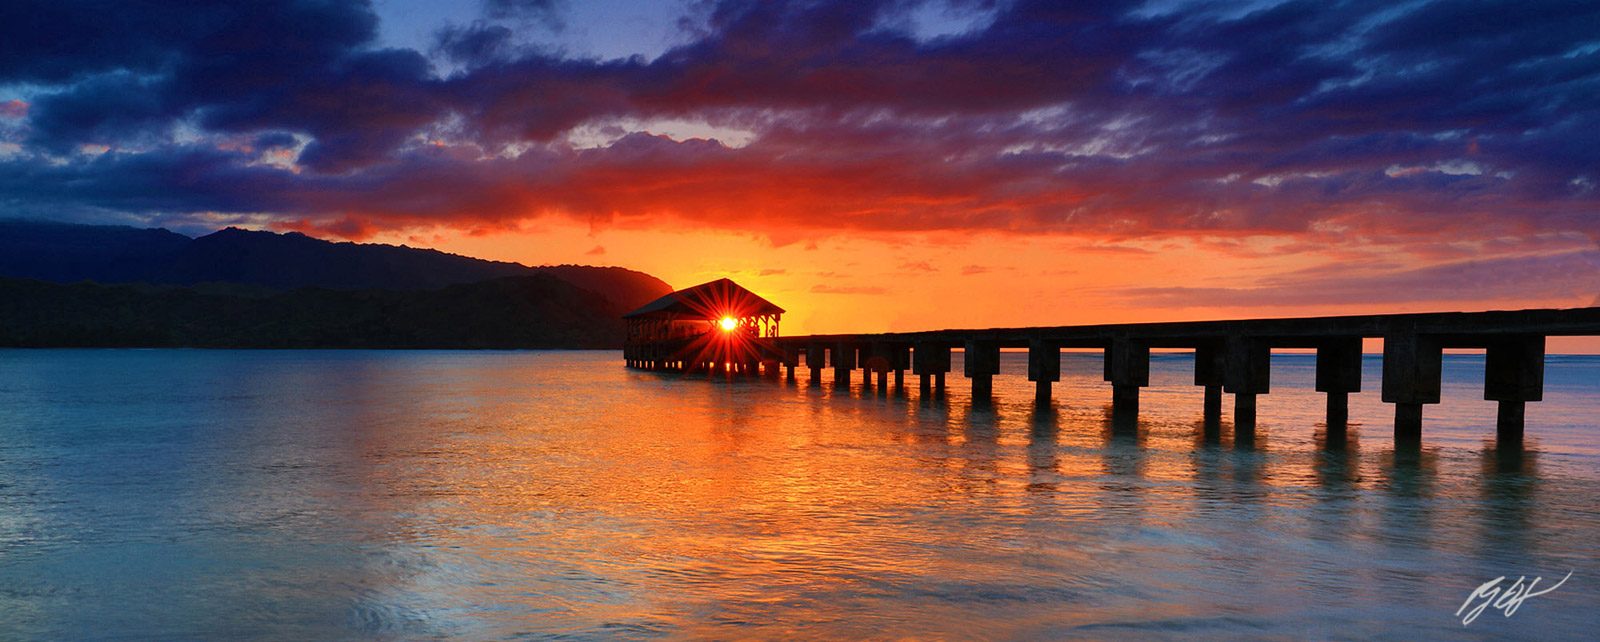 Sunset and the Hanalei Pier on the Island of Maui in Hawaii